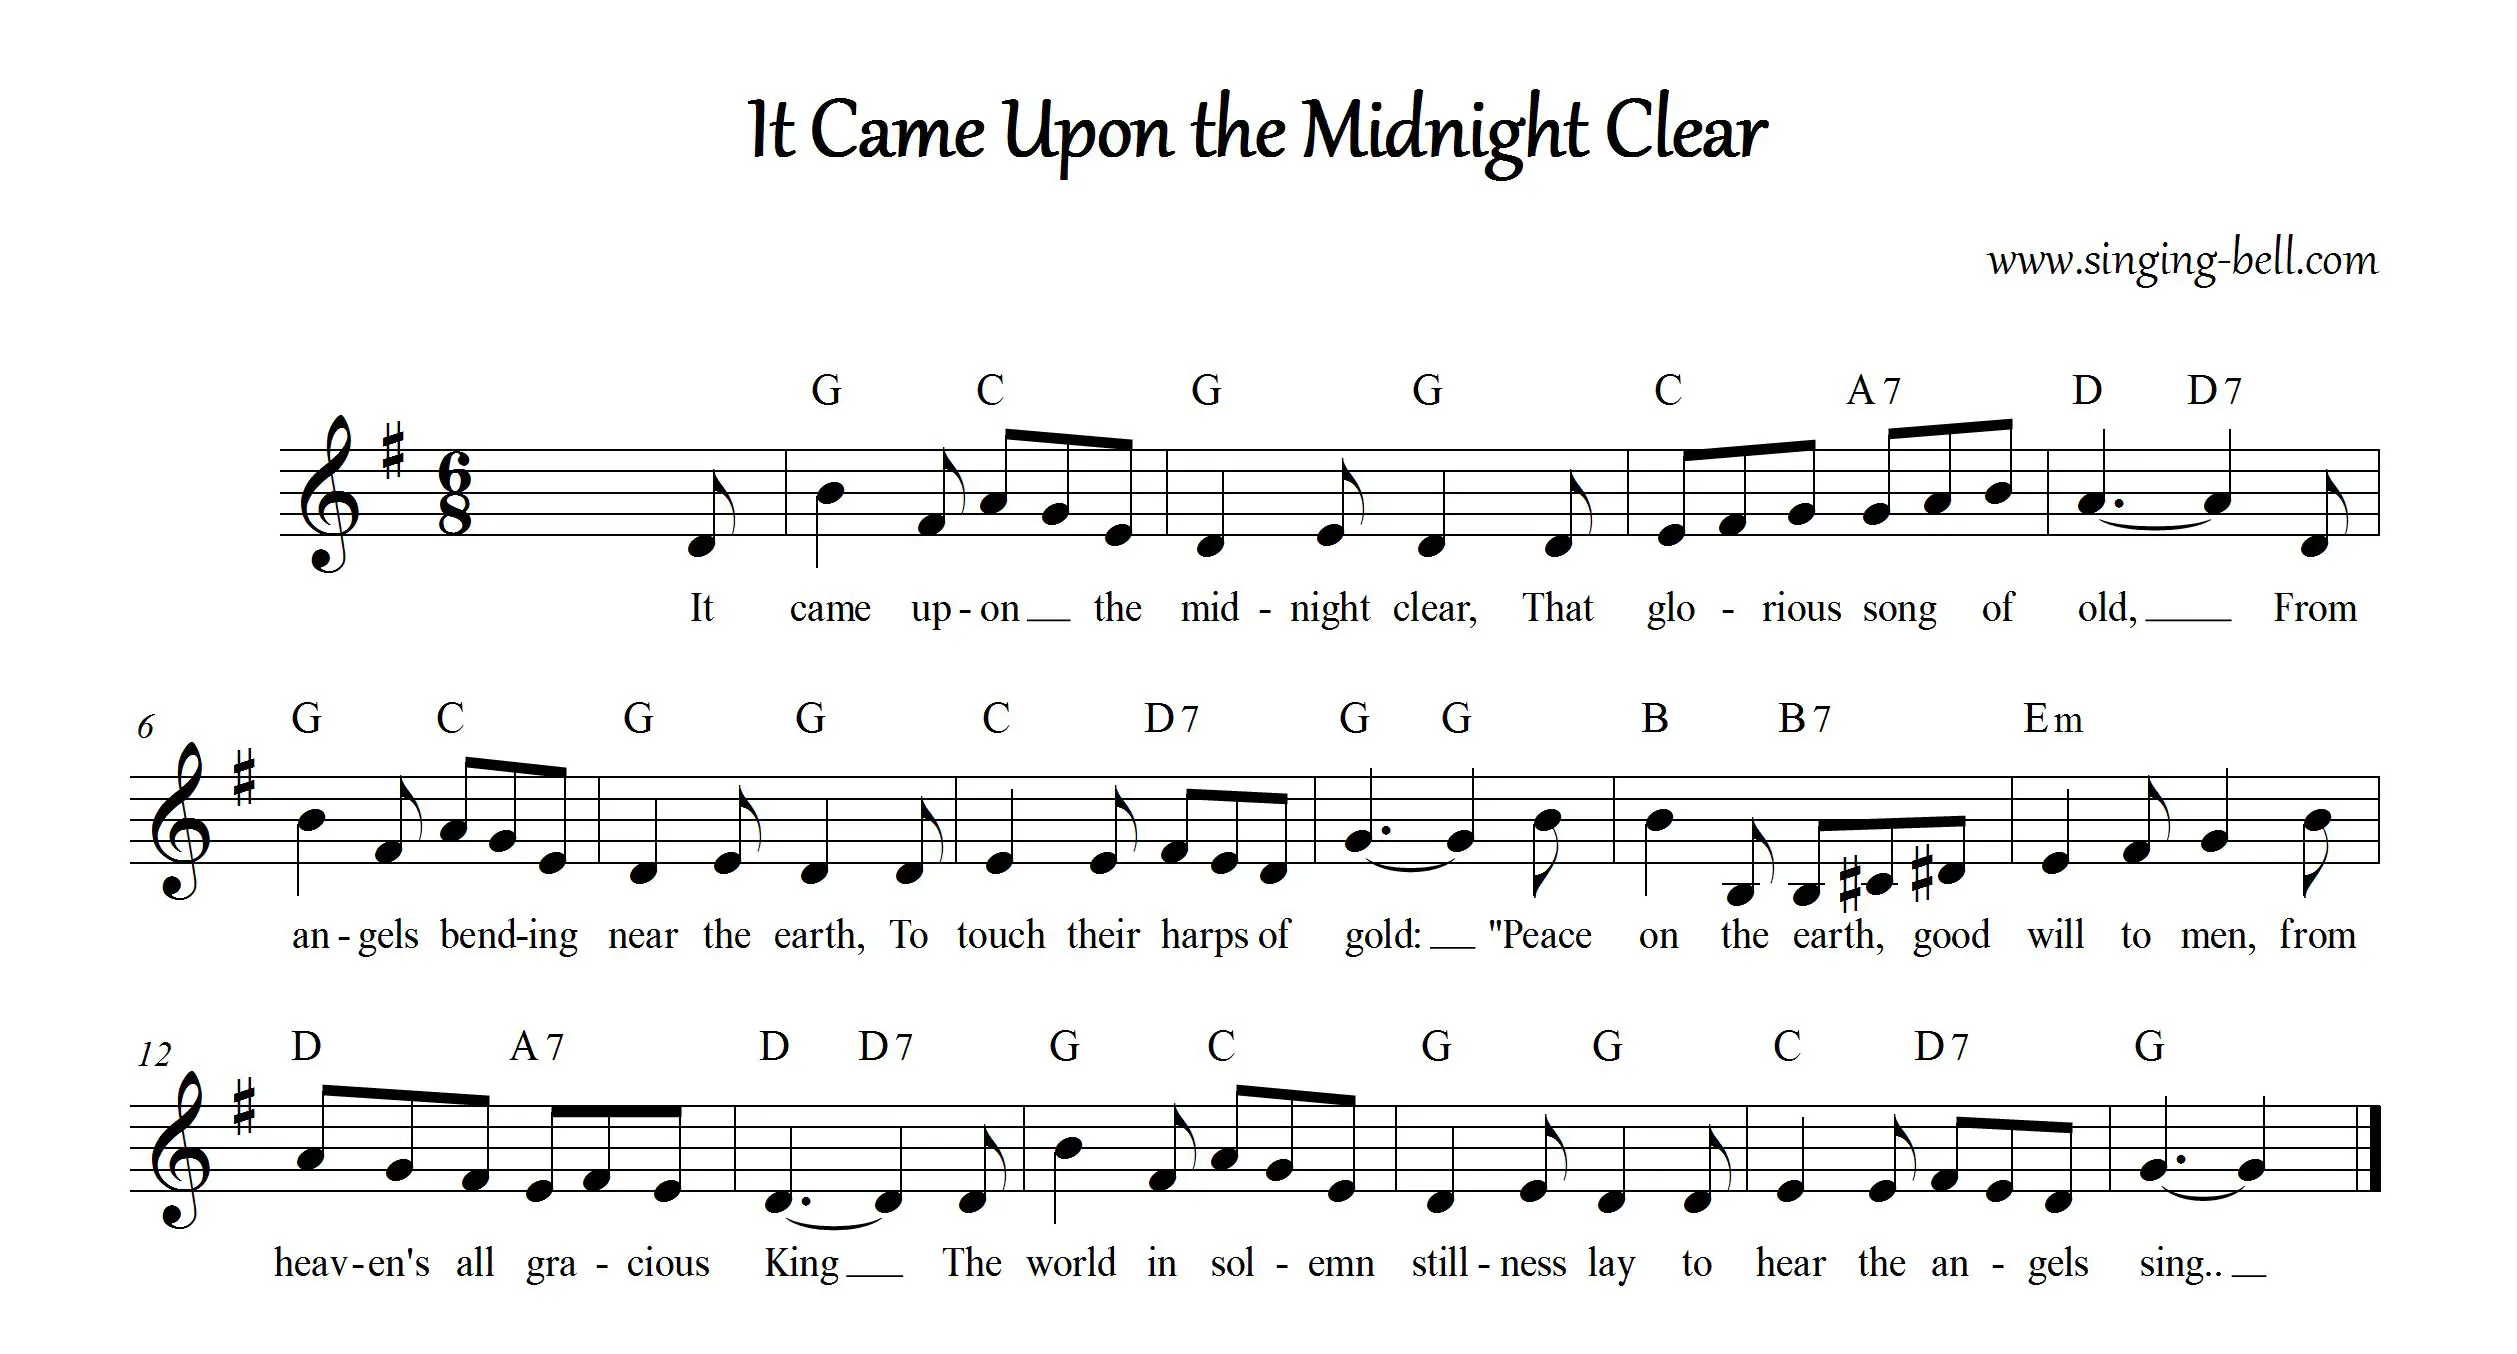 It Came Upon the Midnight Clear | Free Music Score